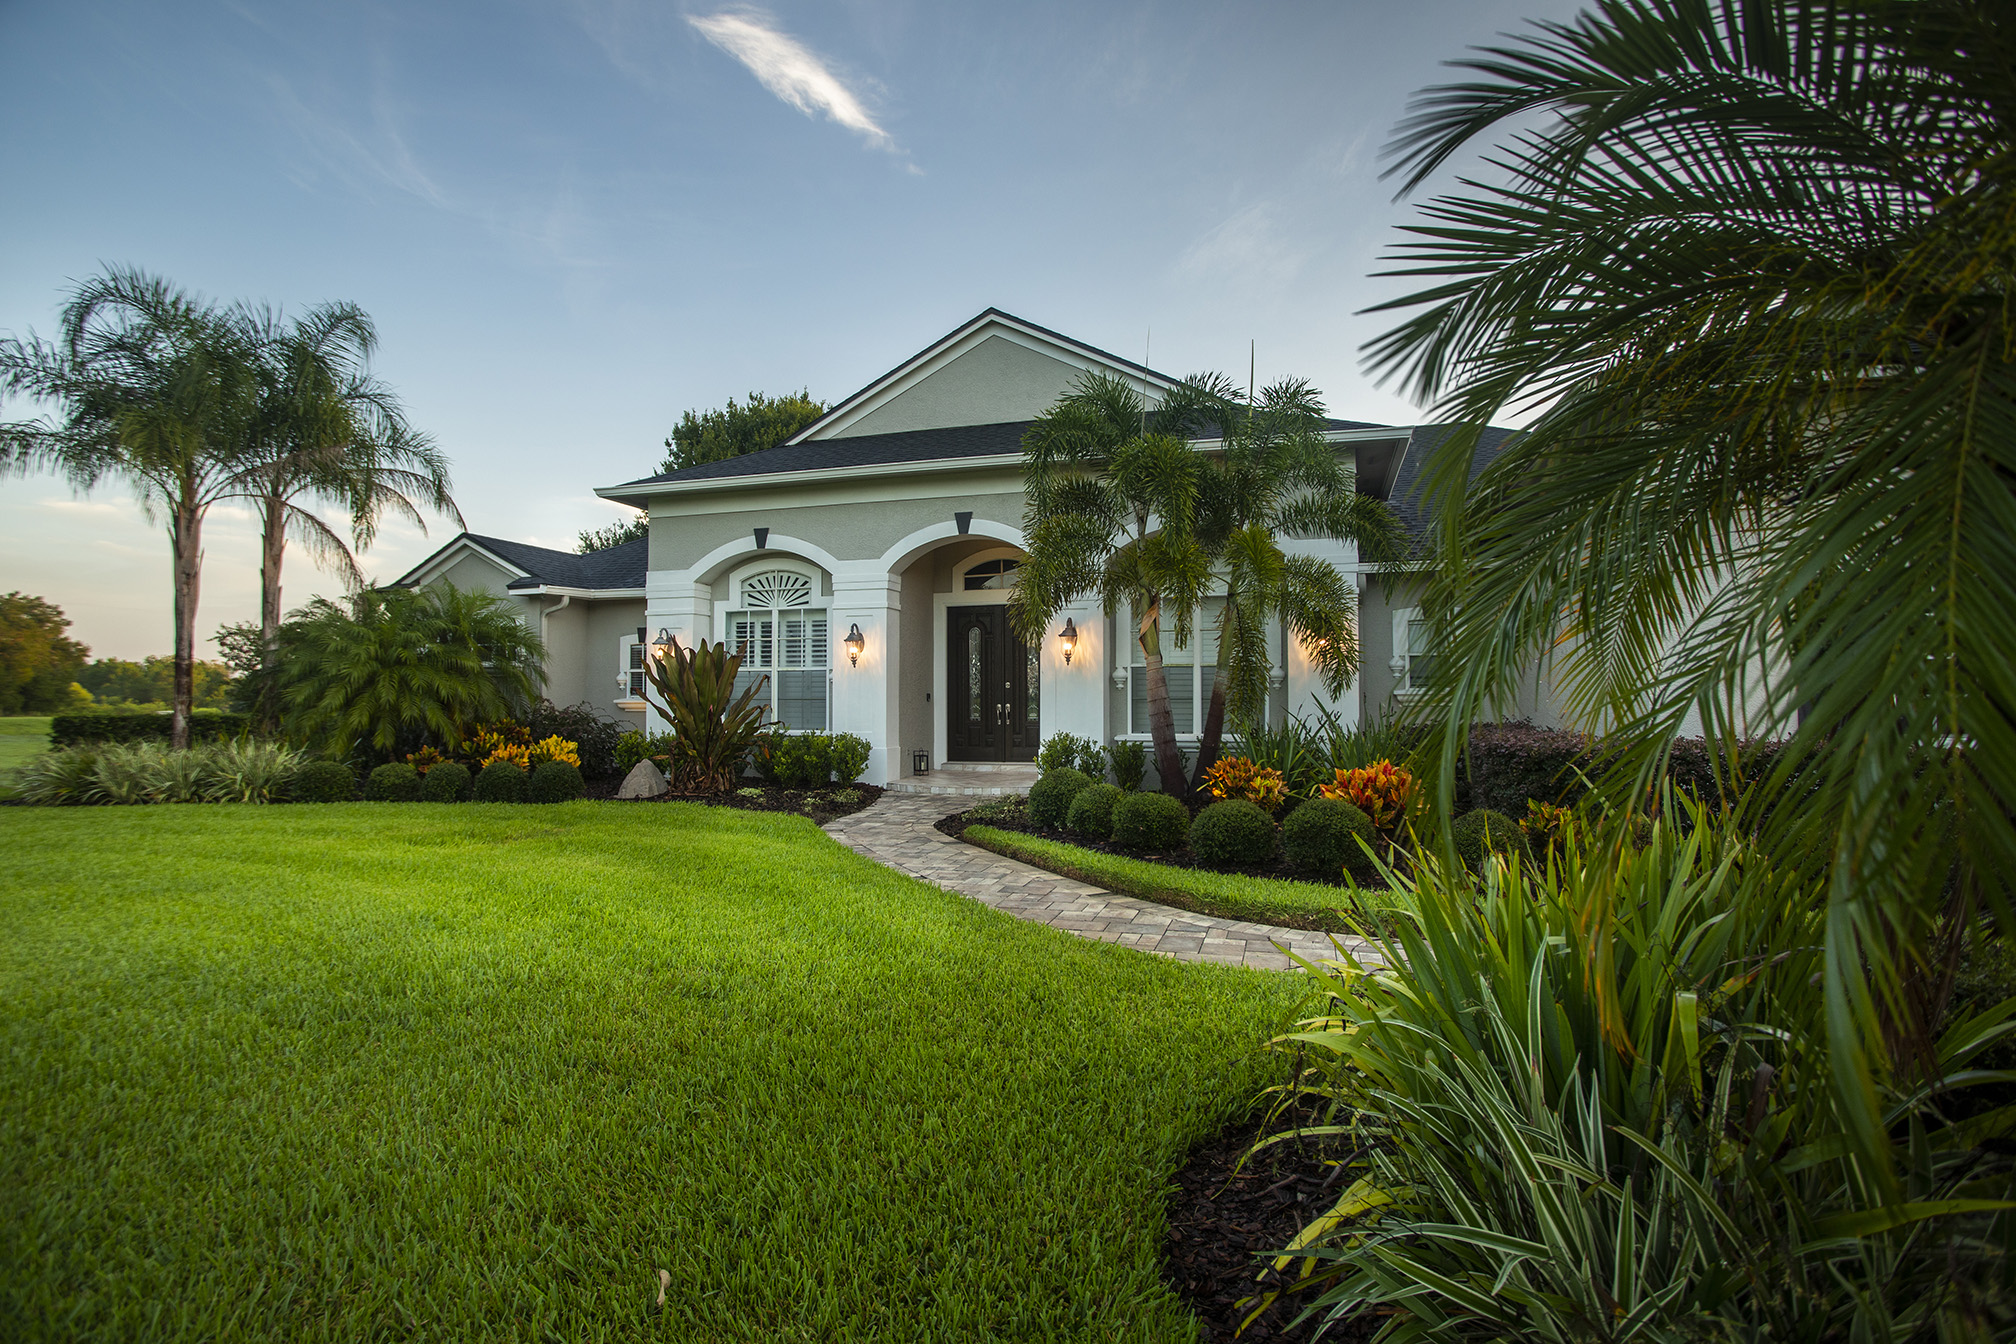 20 Great Ideas For The Best Front Yard Landscaping At Your Orlando Fl Home